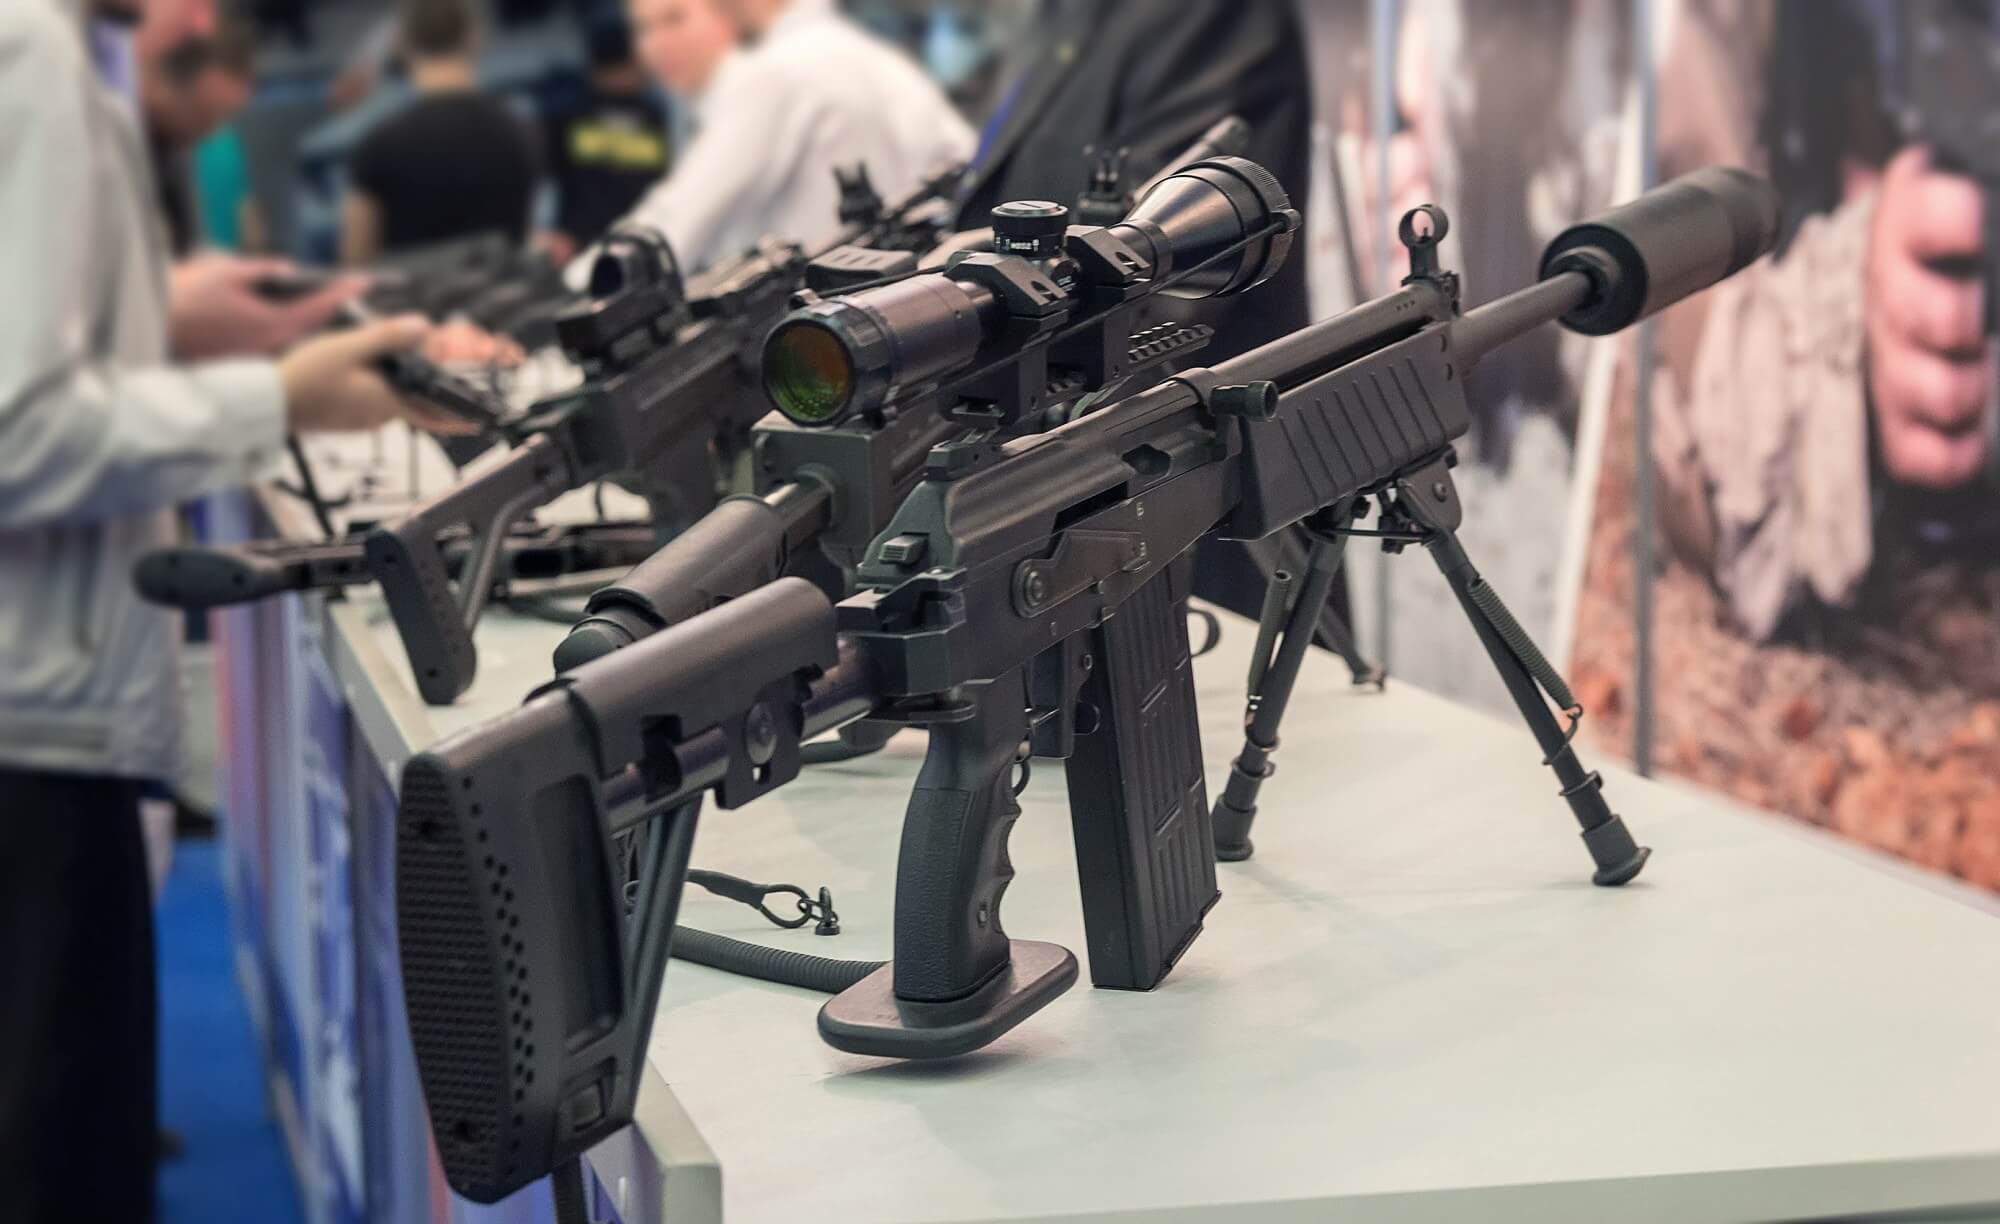 Salesforce says companies that sell semi-automatic weapons can't use its software